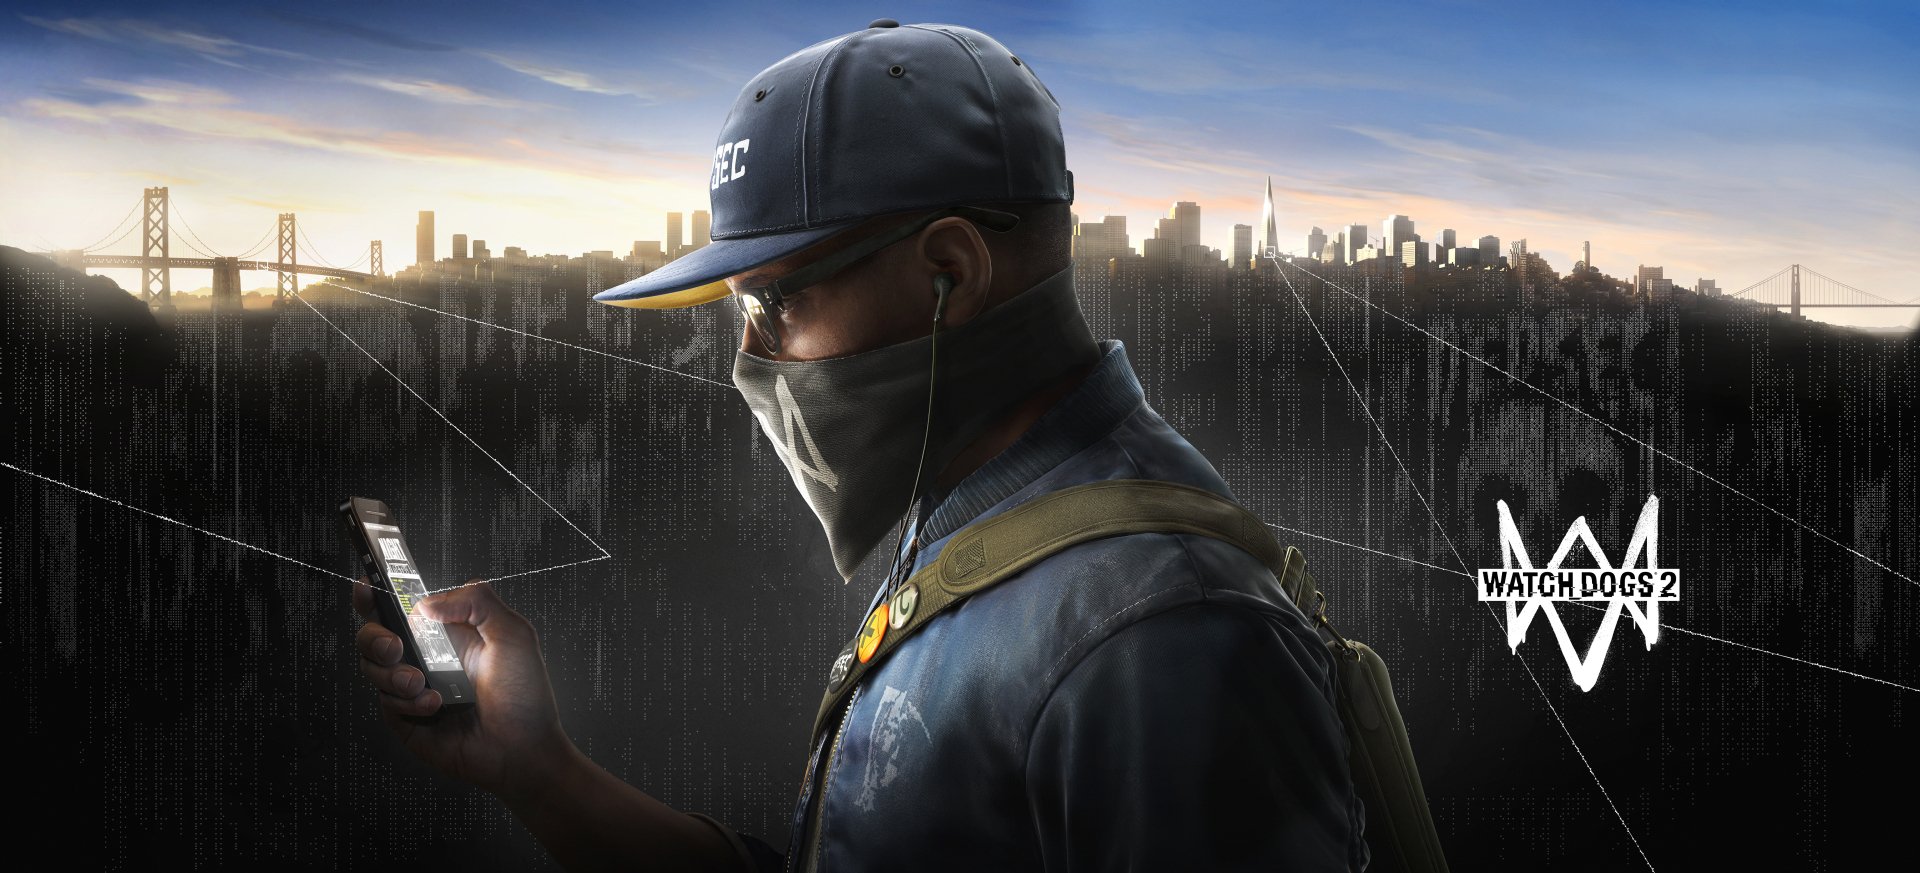 download uplay pc watch dogs 2